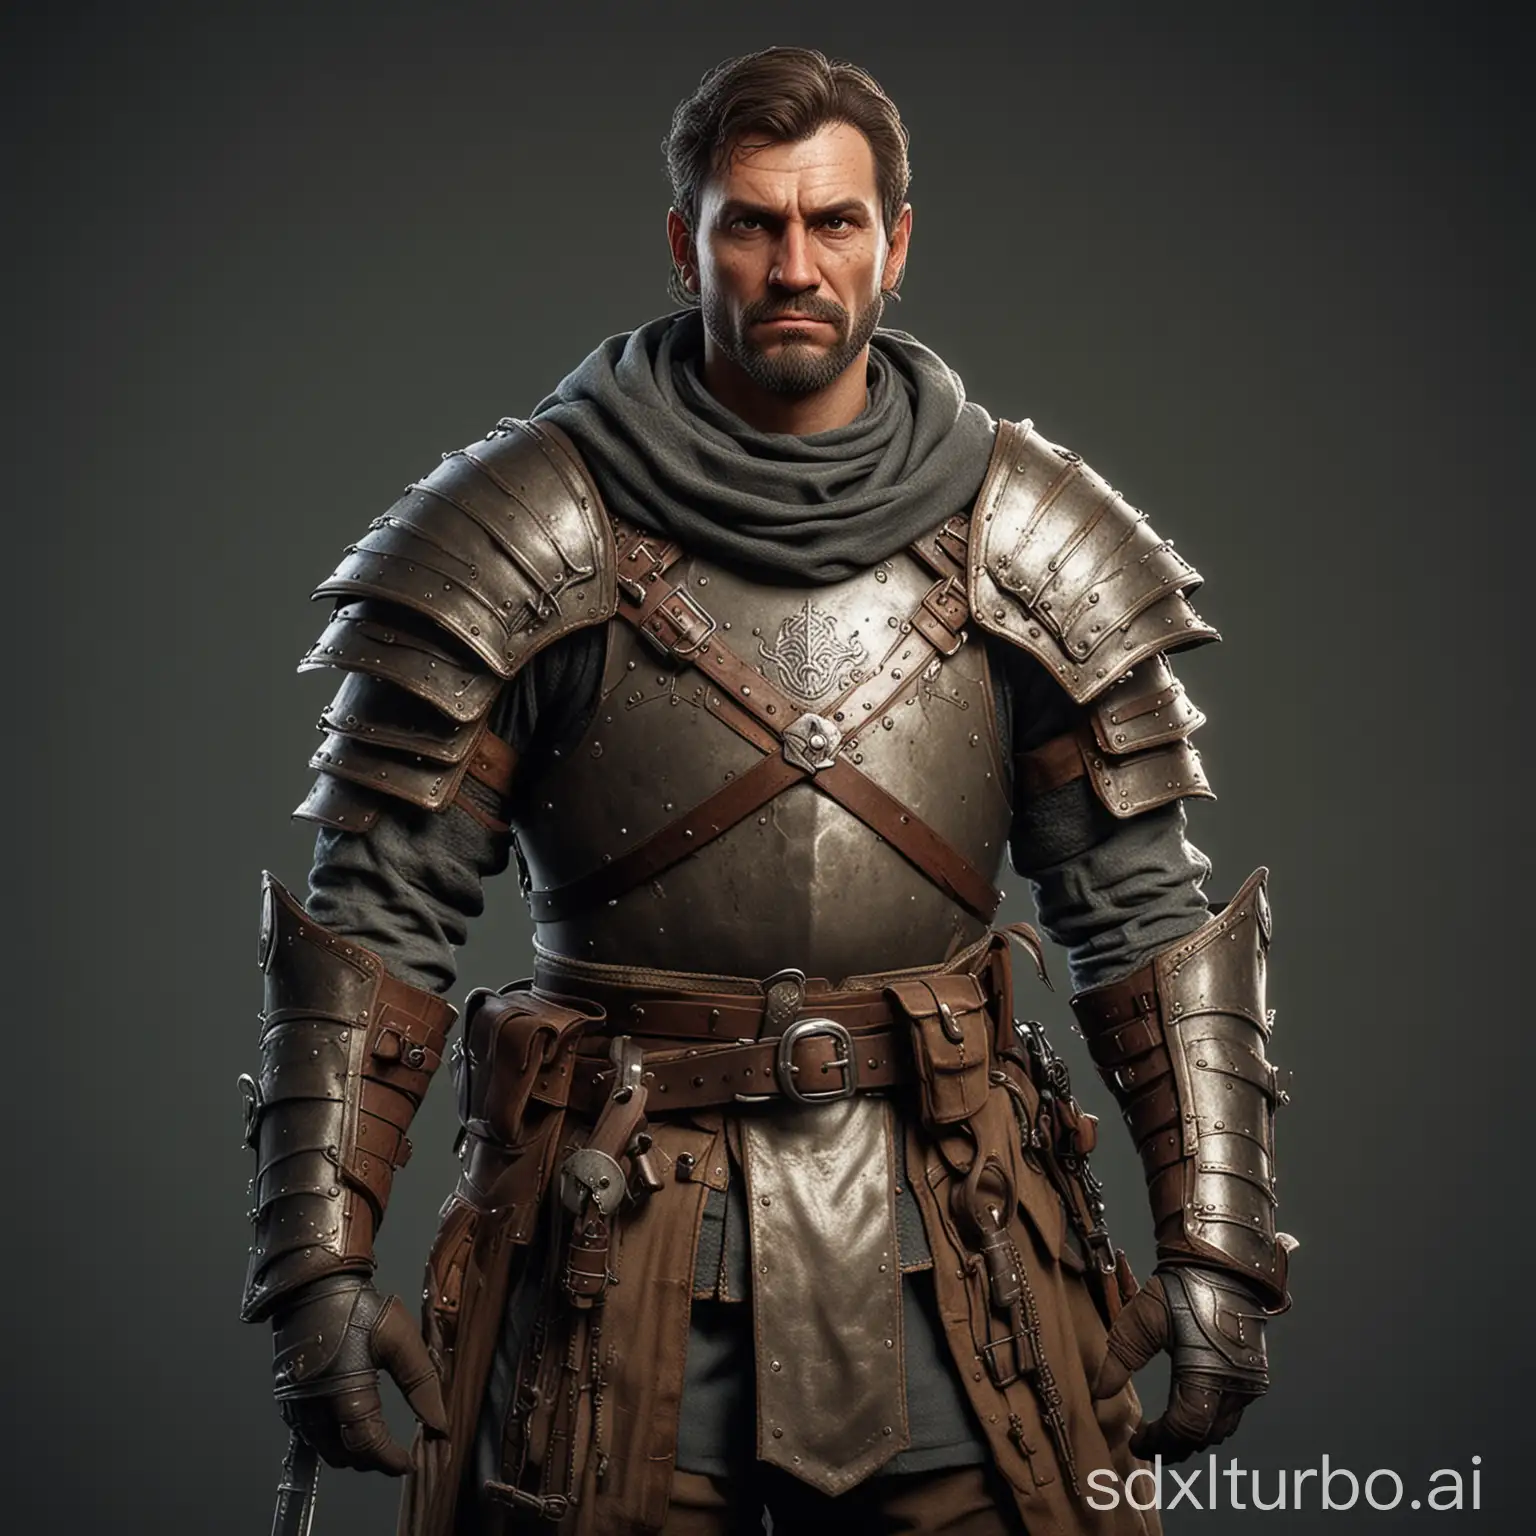 a 40 years old medieval sly headhunter in classy light armor